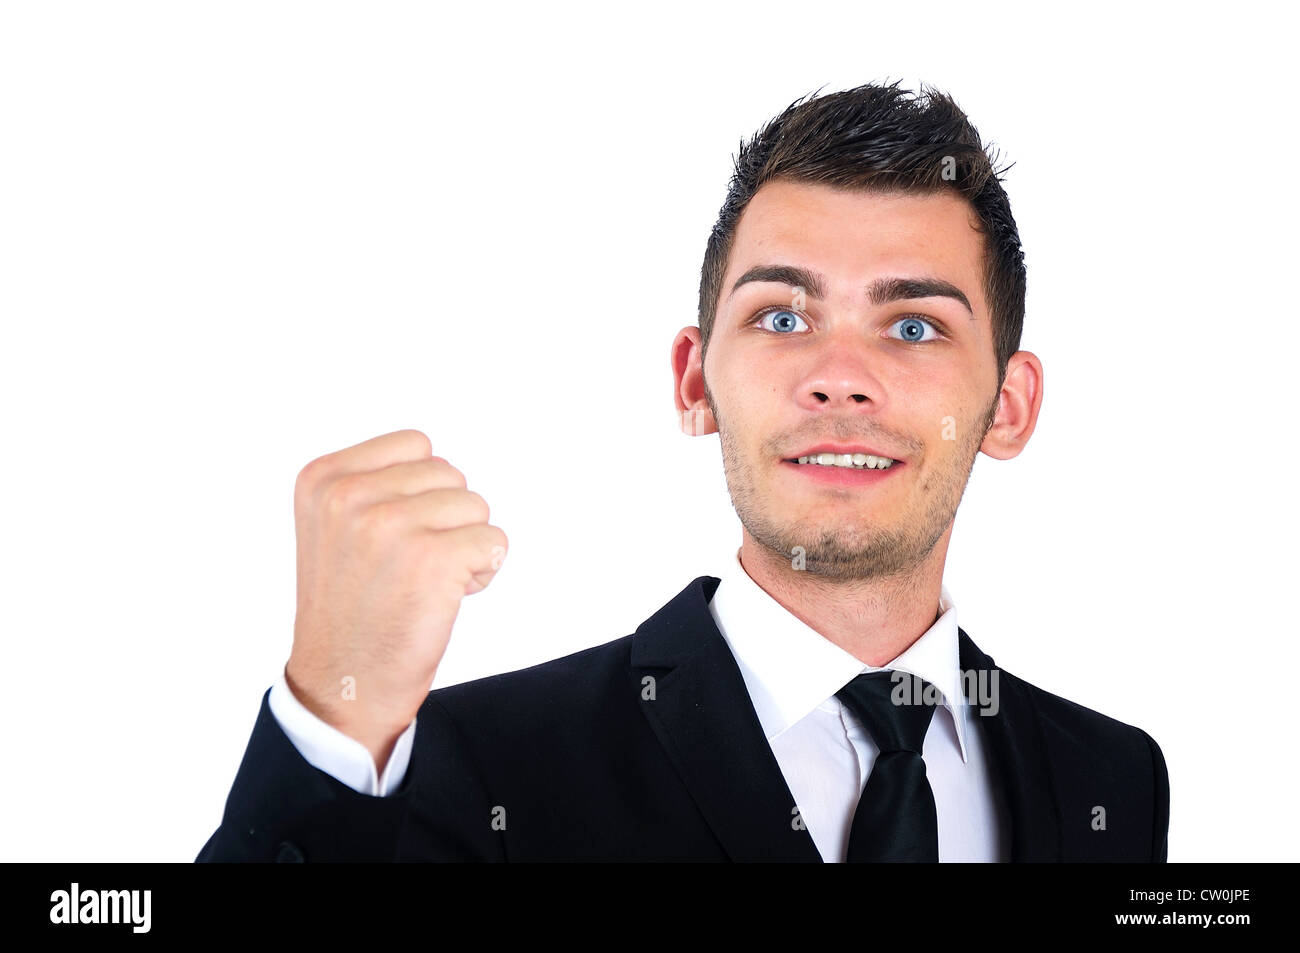 Isolated young business man approval Stock Photo